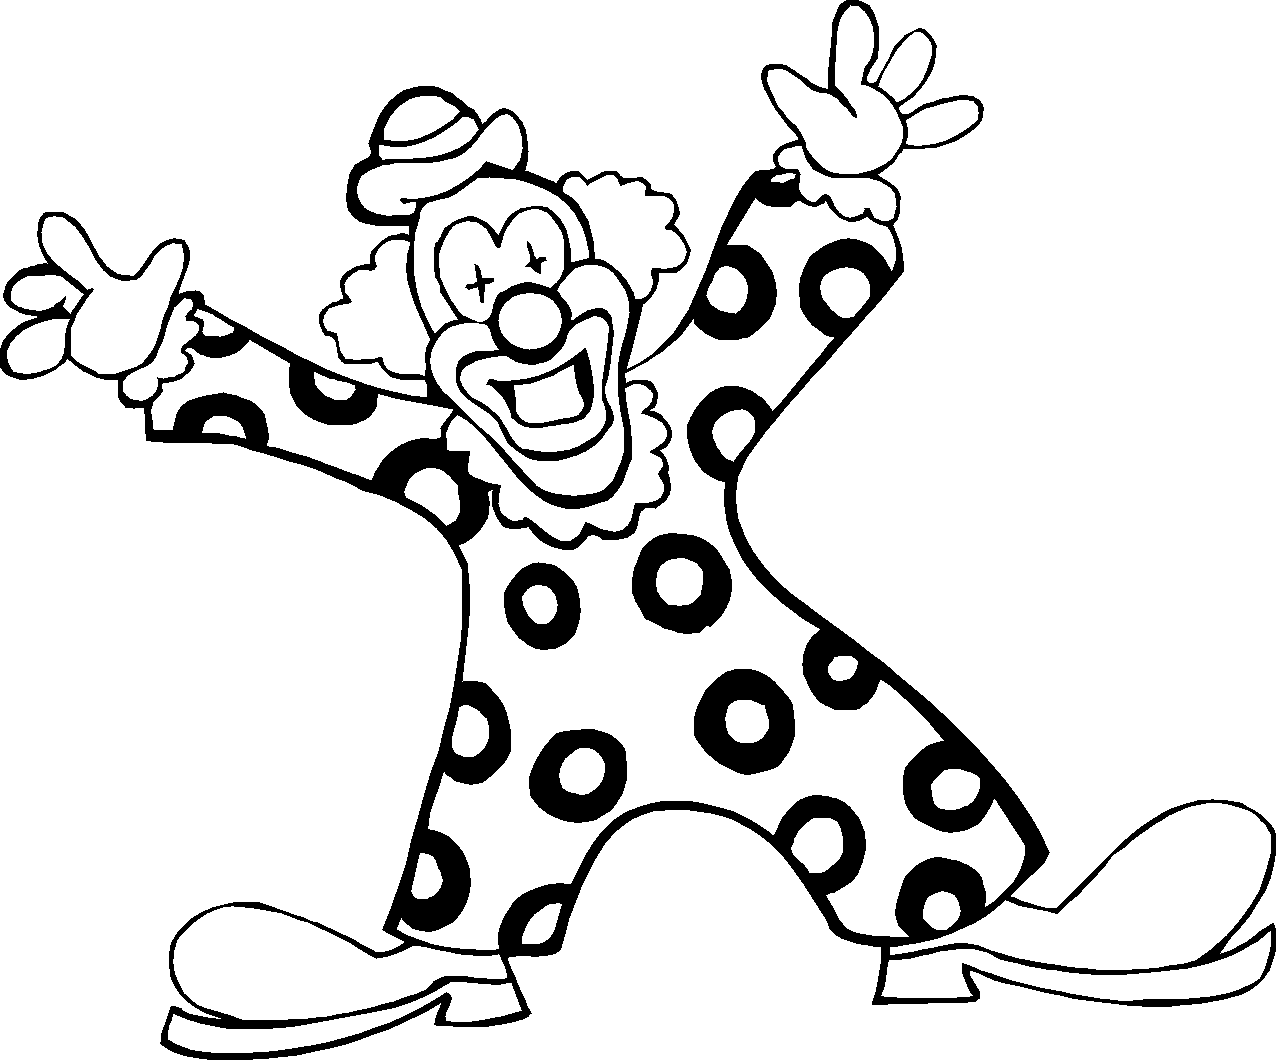 Scary Clown Coloring Pages - Colorine.net | #10846